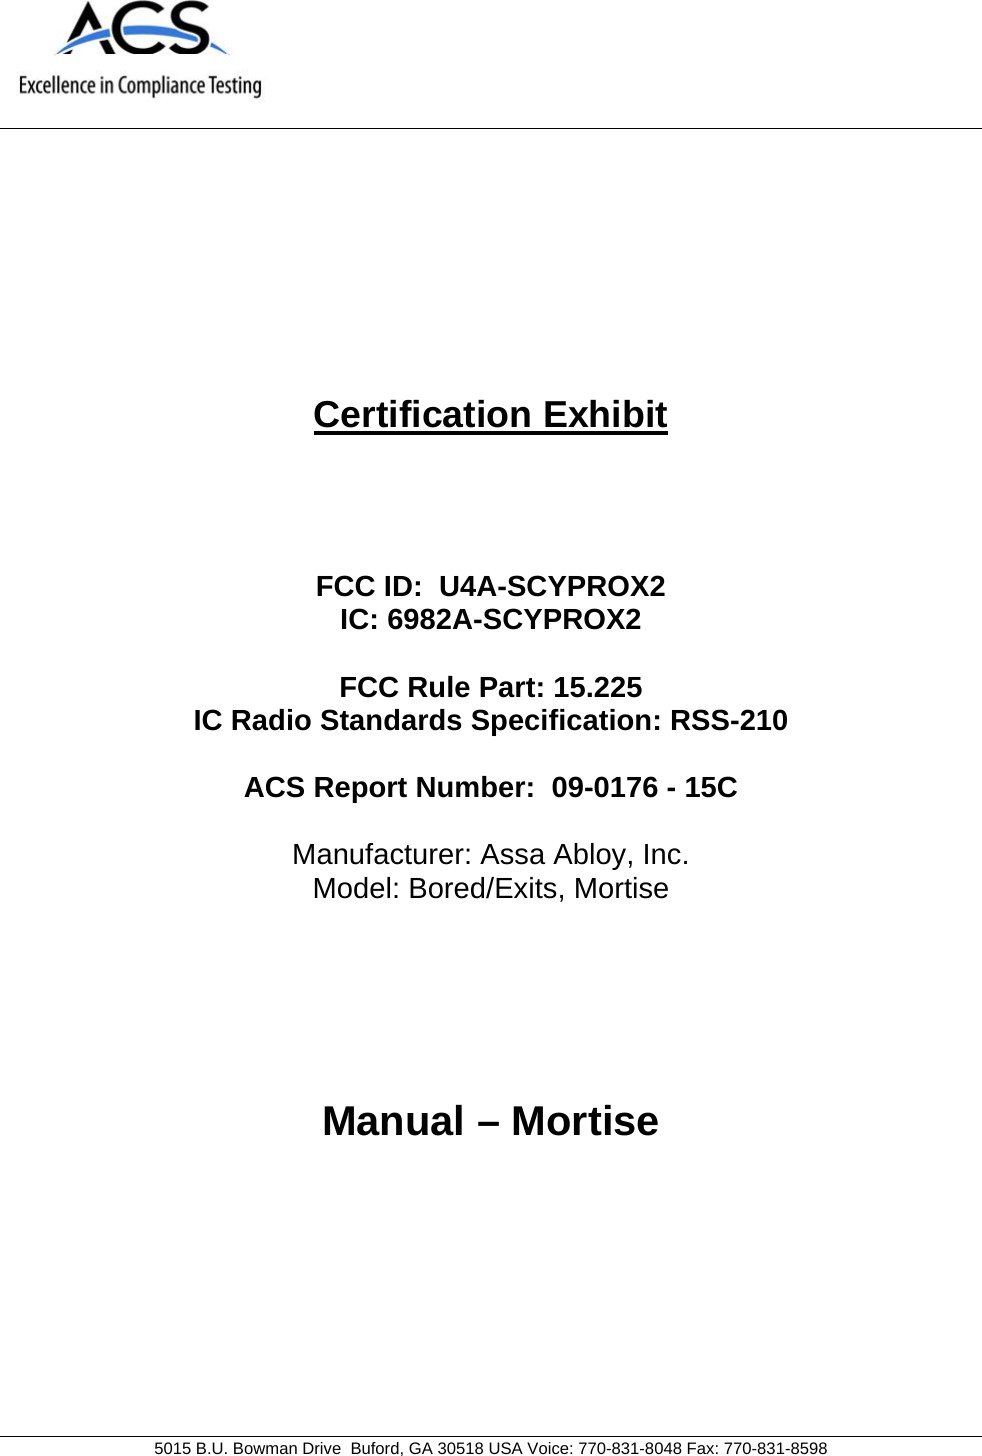     5015 B.U. Bowman Drive  Buford, GA 30518 USA Voice: 770-831-8048 Fax: 770-831-8598   Certification Exhibit     FCC ID:  U4A-SCYPROX2 IC: 6982A-SCYPROX2  FCC Rule Part: 15.225 IC Radio Standards Specification: RSS-210  ACS Report Number:  09-0176 - 15C   Manufacturer: Assa Abloy, Inc. Model: Bored/Exits, Mortise     Manual – Mortise  